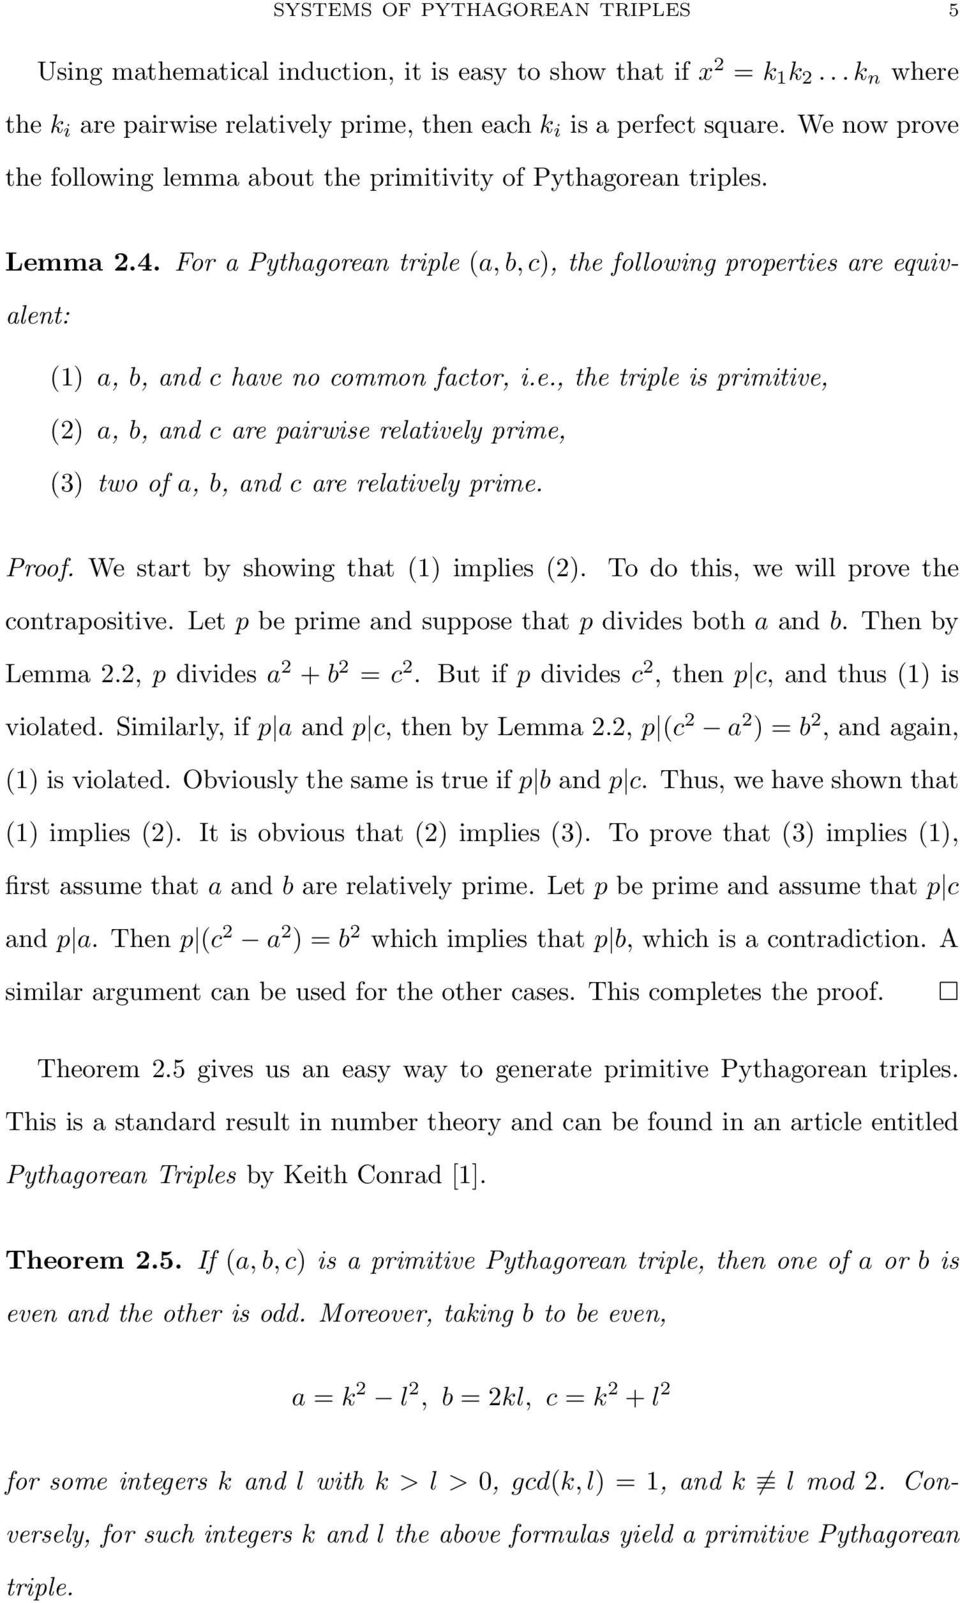 For a Pythagorean triple (a, b, c), the following properties are equivalent: (1) a, b, and c have no common factor, i.e., the triple is primitive, () a, b, and c are pairwise relatively prime, (3) two of a, b, and c are relatively prime.